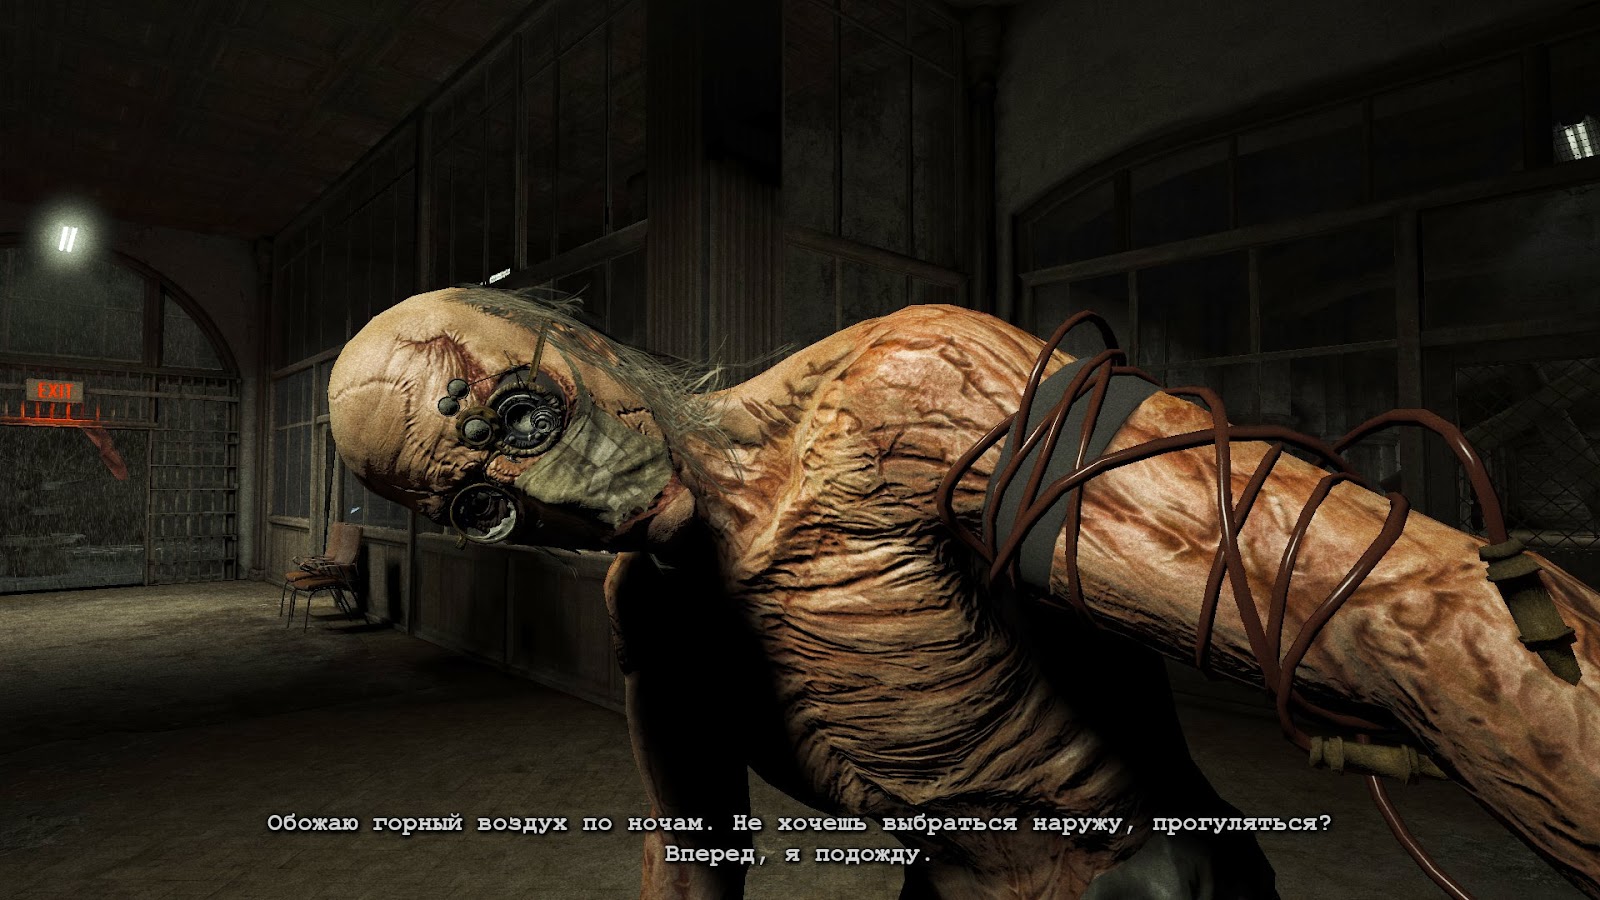 Outlast 2013 For PC Games Full Version Free Download | PC Games Free